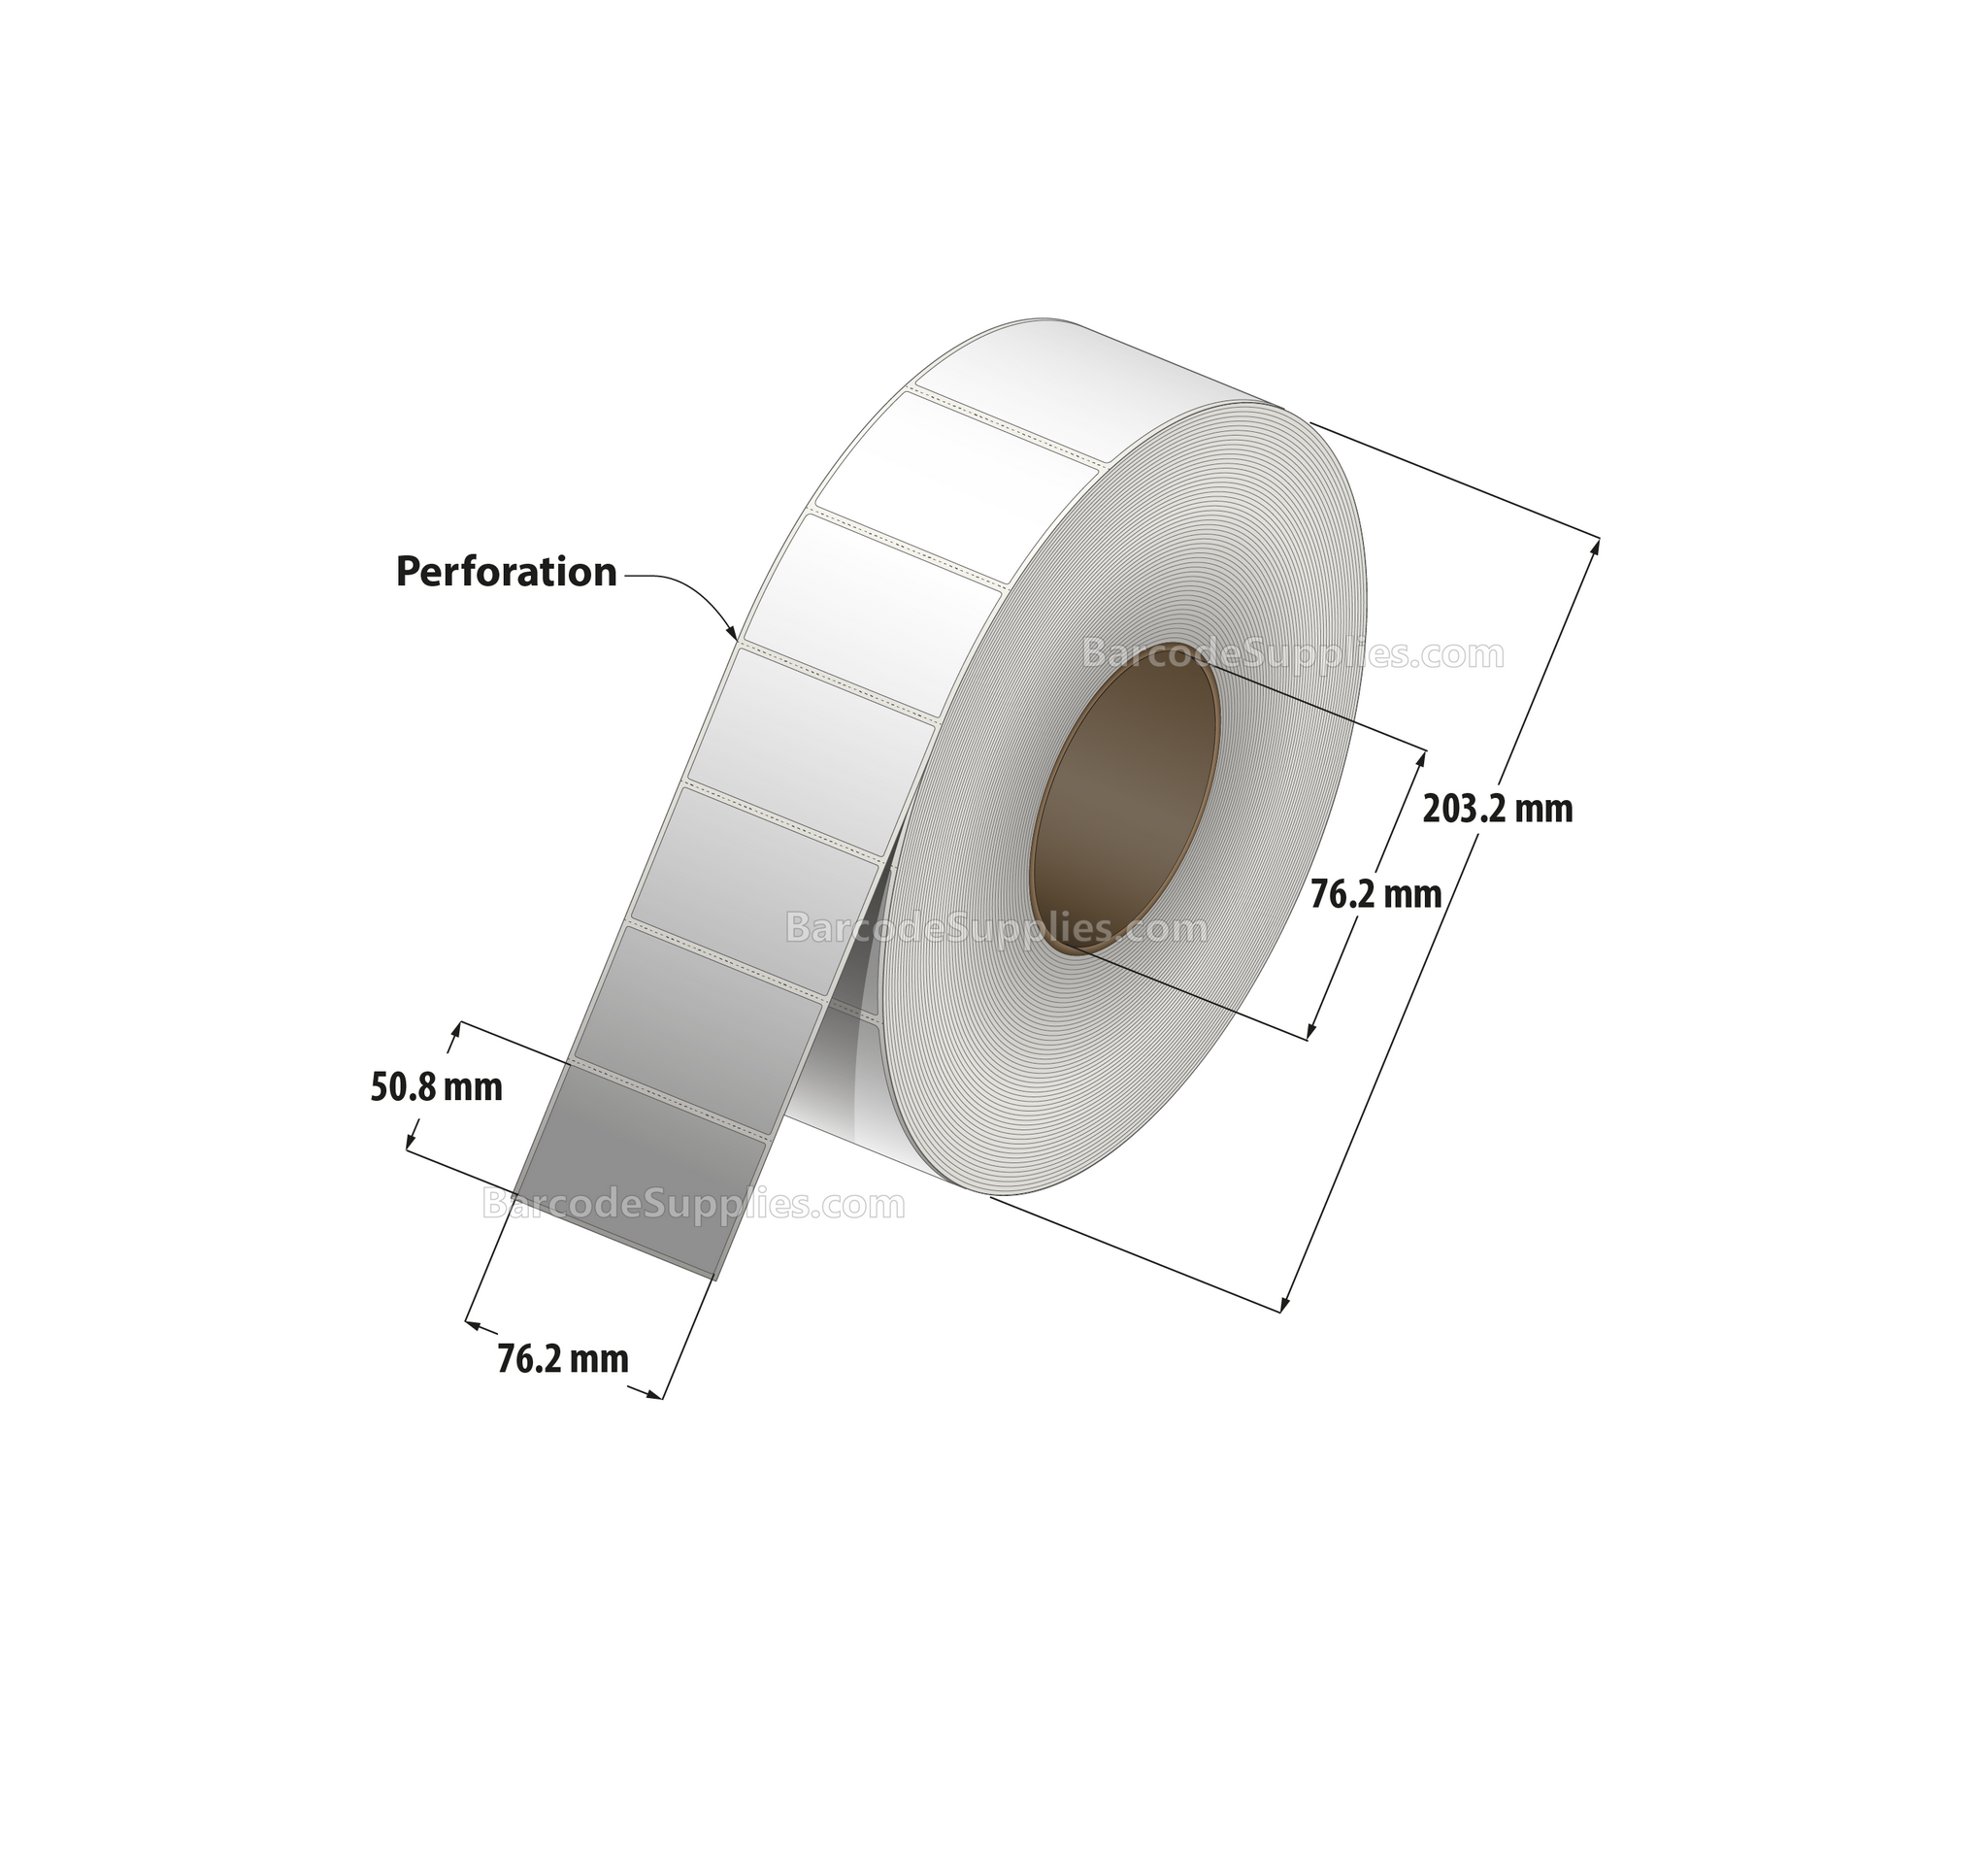 3 x 2 Thermal Transfer White Labels With Permanent Adhesive - Perforated - 2750 Labels Per Roll - Carton Of 8 Rolls - 22000 Labels Total - MPN: RSP-3-2-2750-3